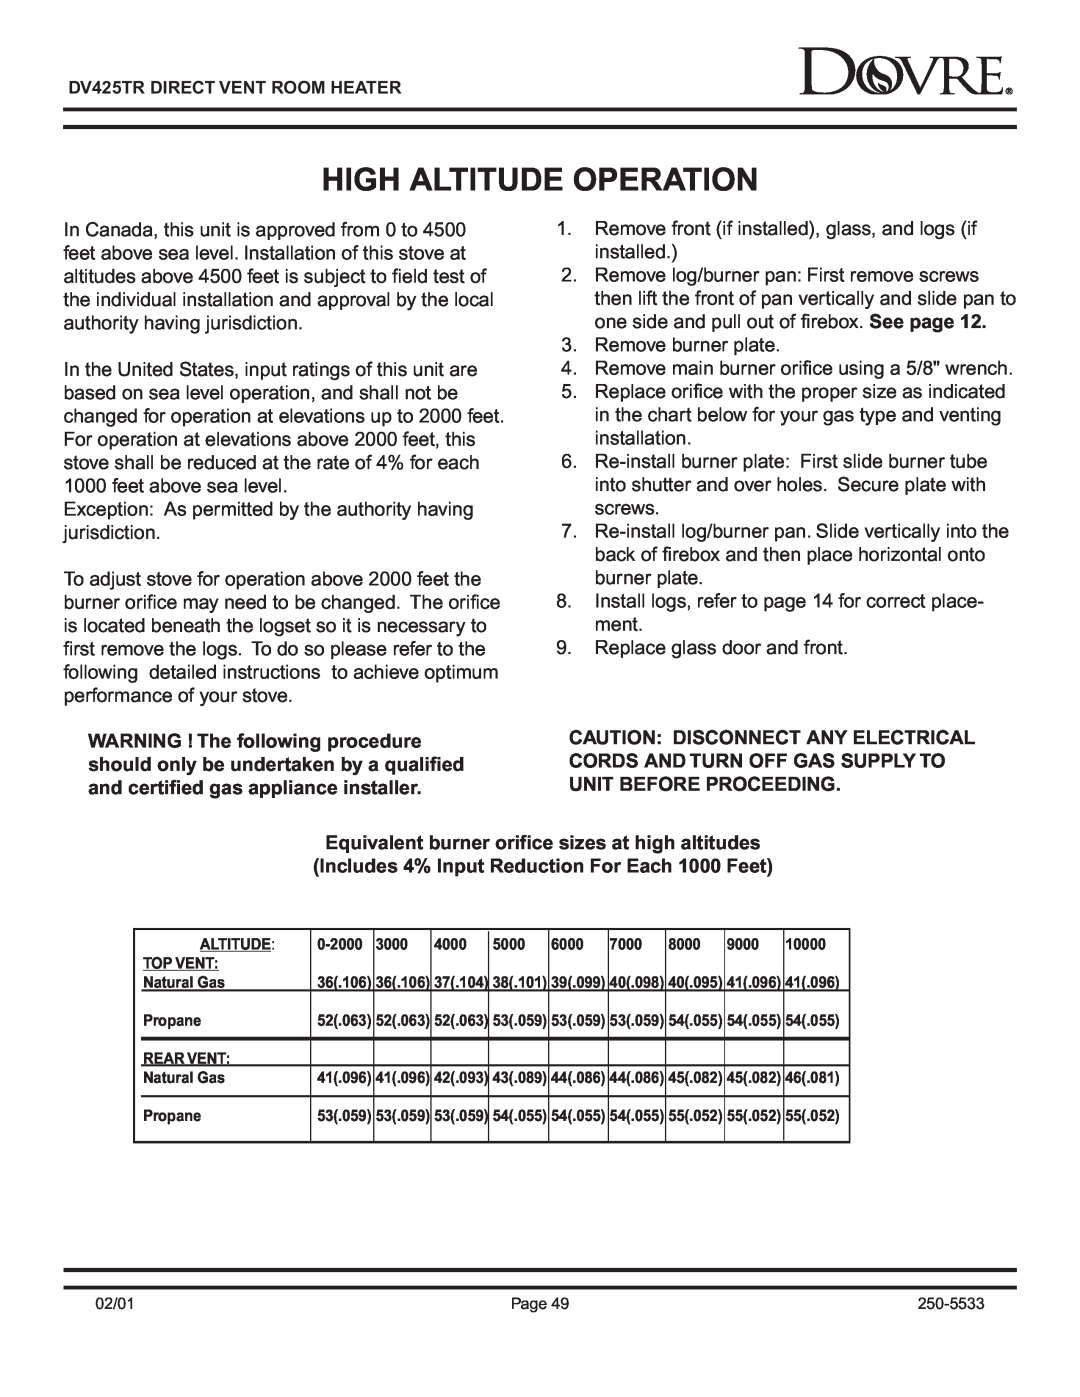 Sapphire Audio DV425TR owner manual High Altitude Operation 